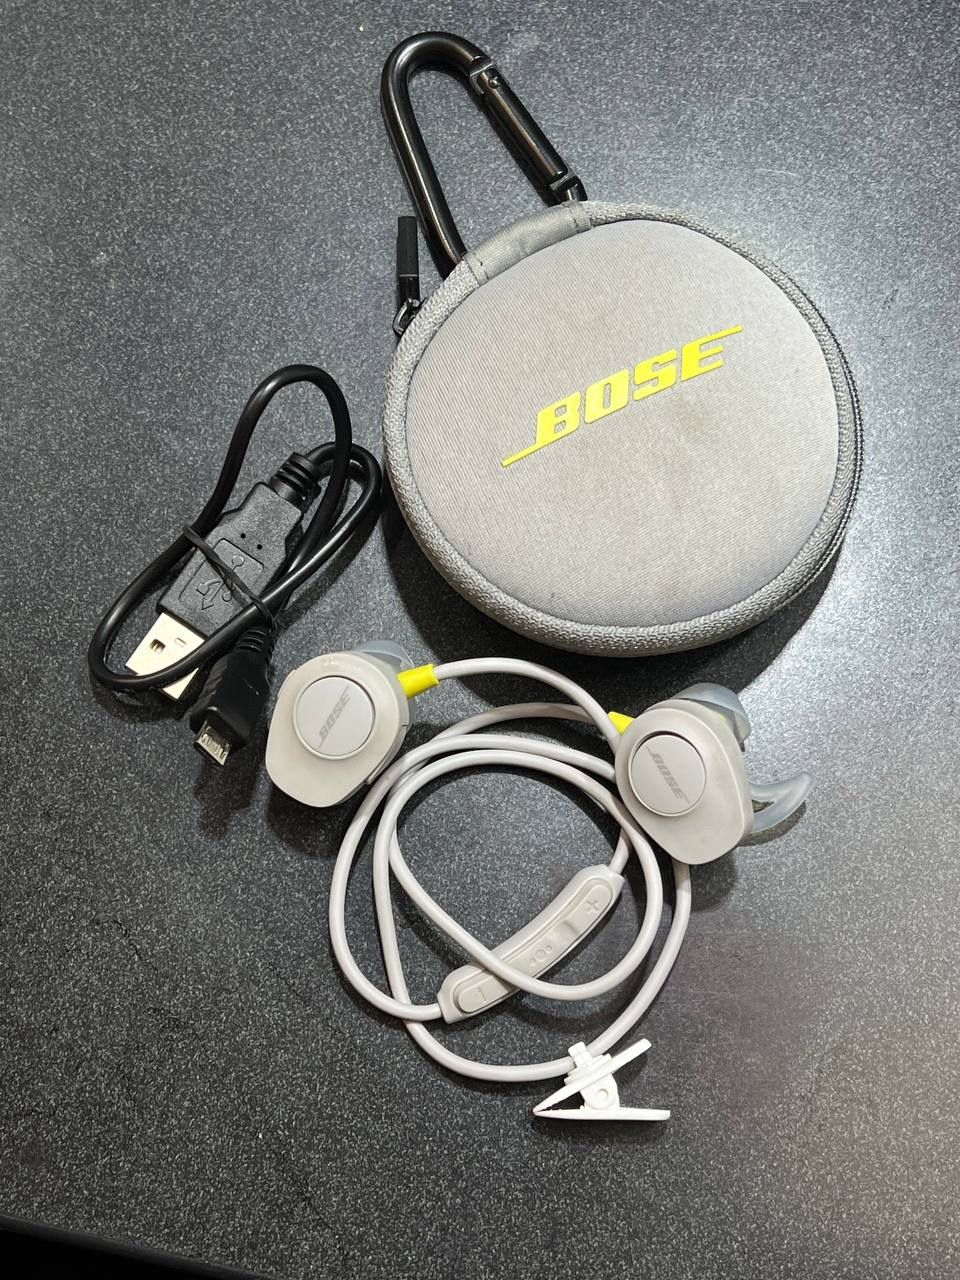 Bose SoundSport A11 IC 3232A Wireless In Ear Earbuds - w/Charging Cable And Case